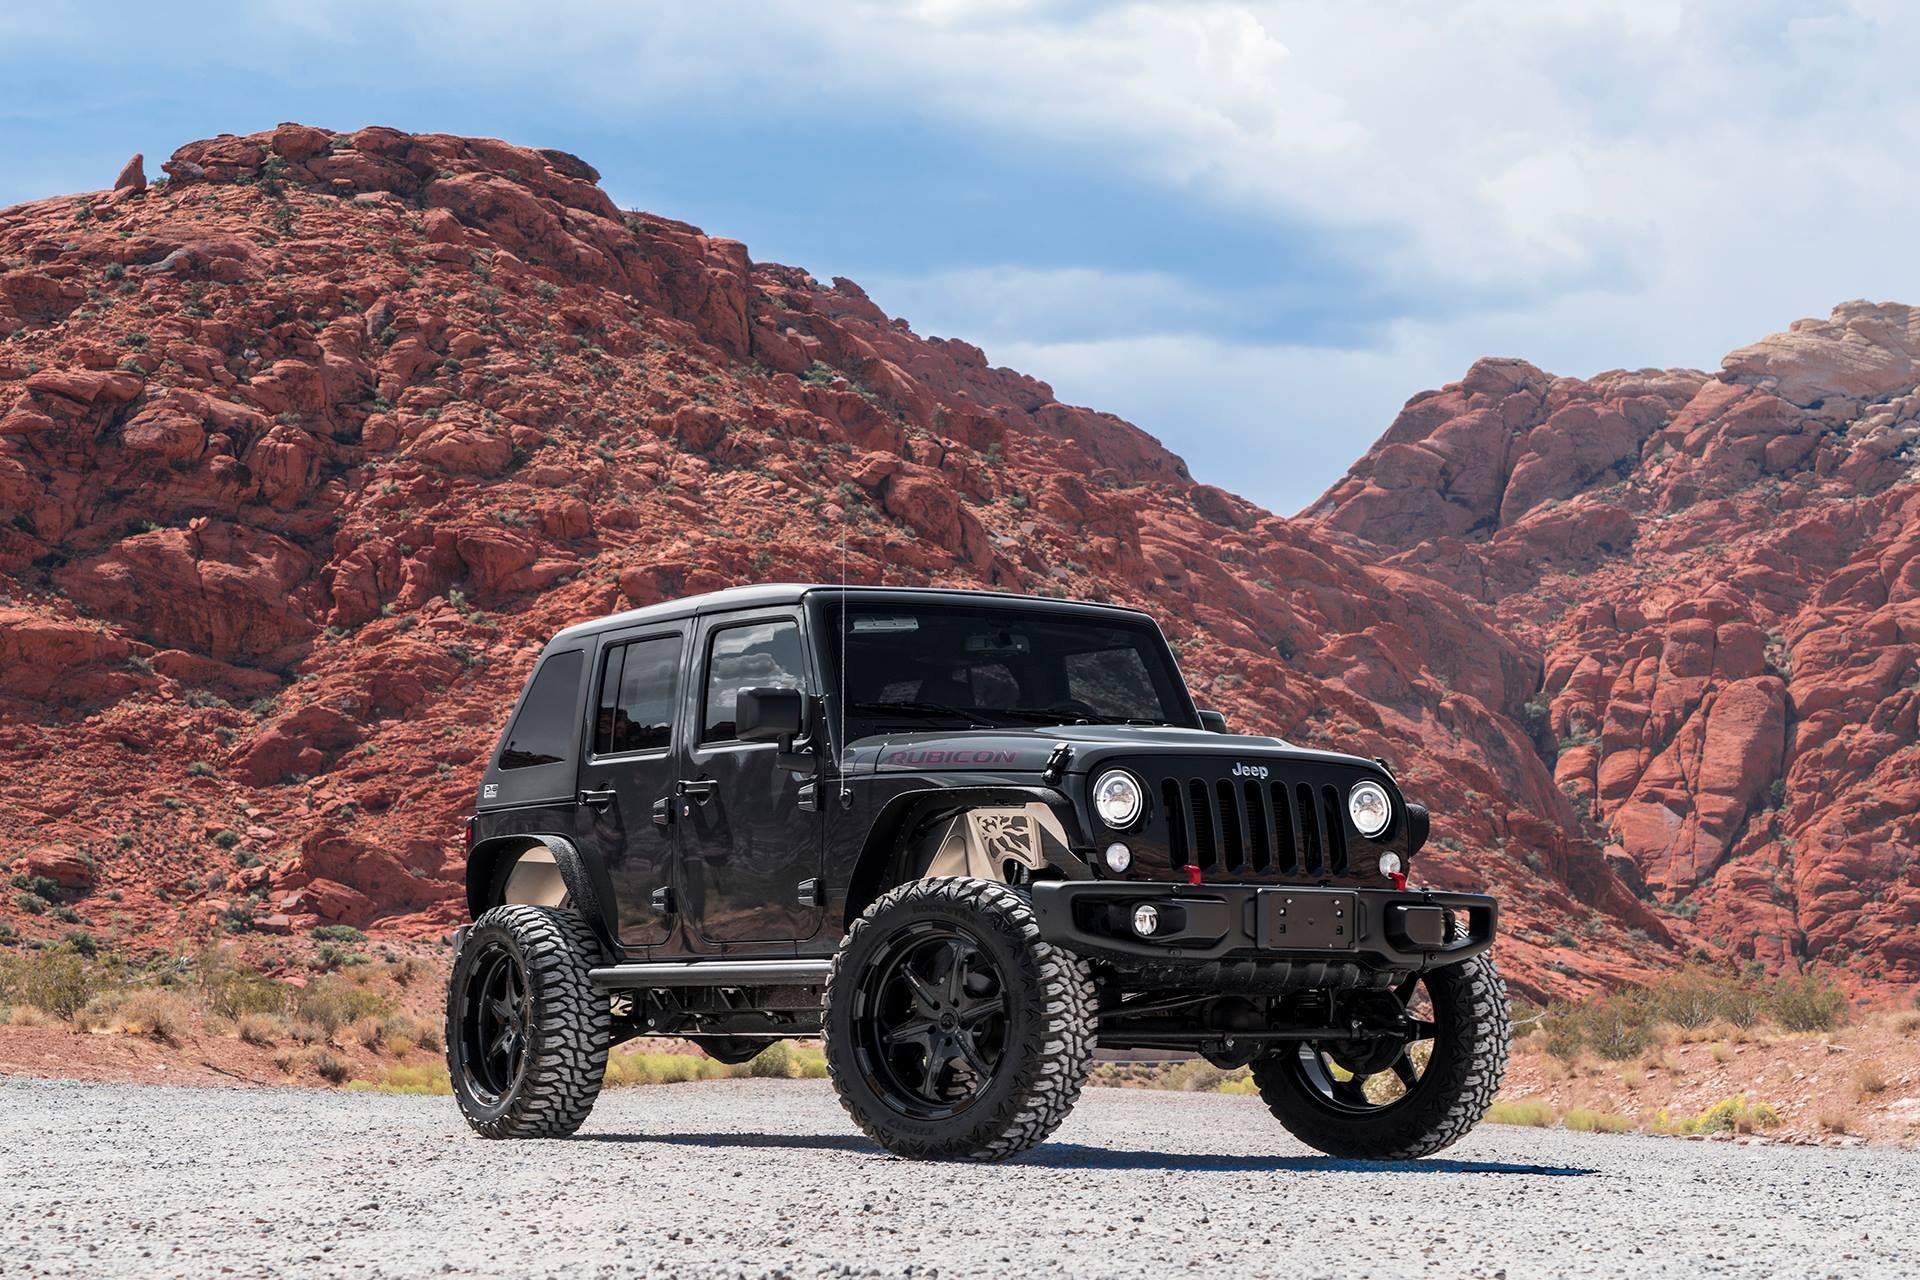 All Black Custom Jeep Wrangler Lifted and Fitted with Black Forgiato Wheels  —  Gallery